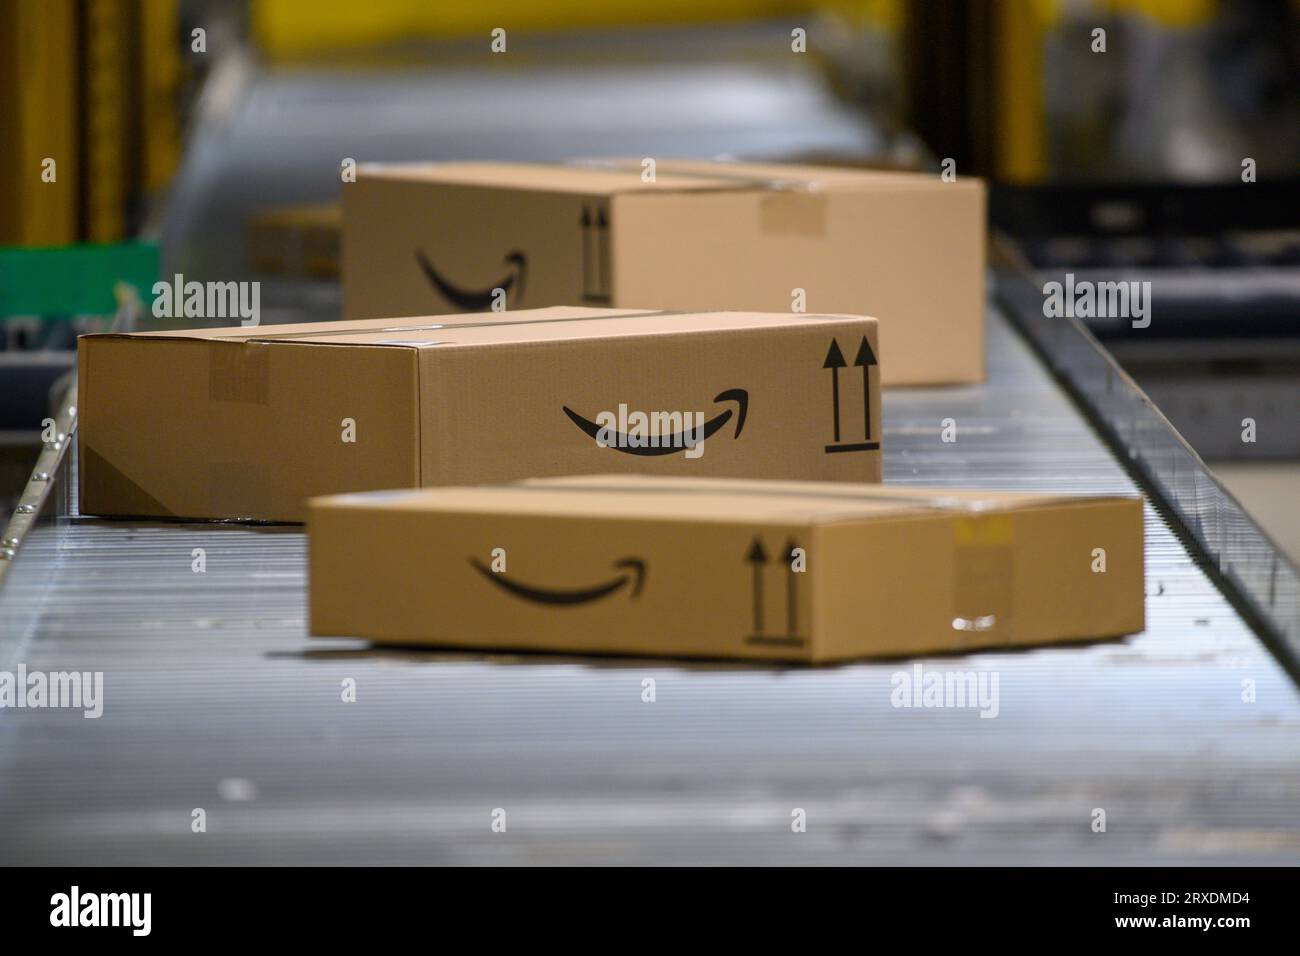 PRODUCTION - 07 September 2023, Saxony-Anhalt, Sülzetal: Amazon packages travel on a conveyor belt through the Amazon logistics center in Sülzetal. Amazon is specifically recruiting members of the German armed forces. For some time now, the mail order company has been explicitly advertising its 'Military Recruitment Program' to attract military personnel as employees. In times of a shortage of skilled workers, this is a field that is apparently becoming increasingly interesting for other companies as well. (to dpa: 'Recruits for the free economy - companies rely on soldiers') Photo: Klaus-Diet Stock Photo